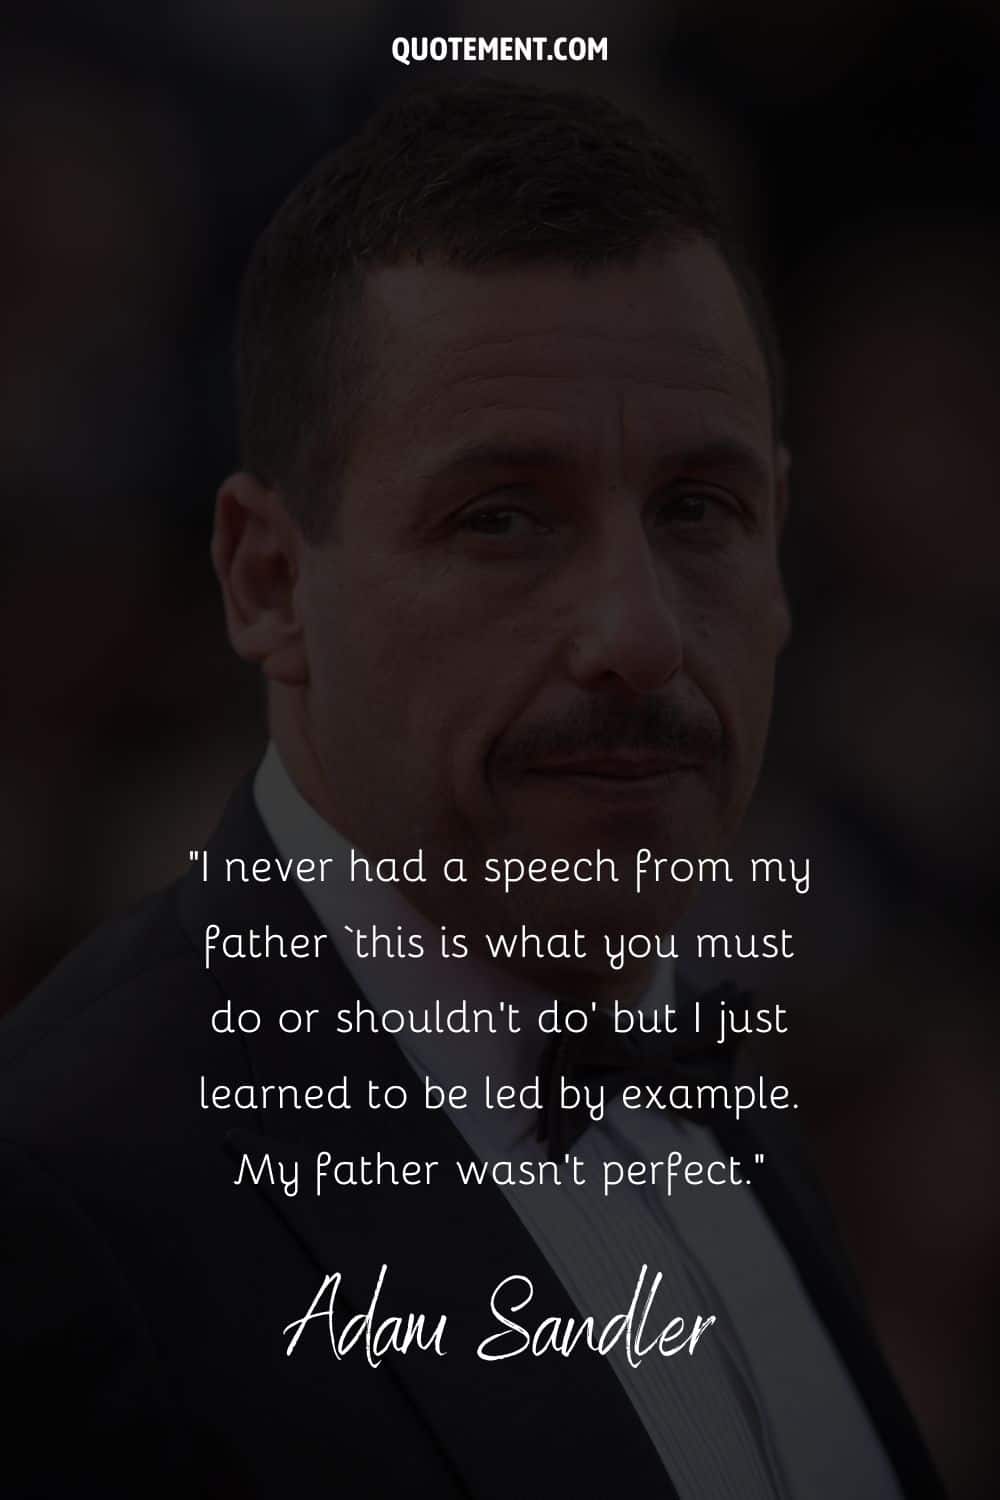 quote by Adam Sandler on spoiling kids